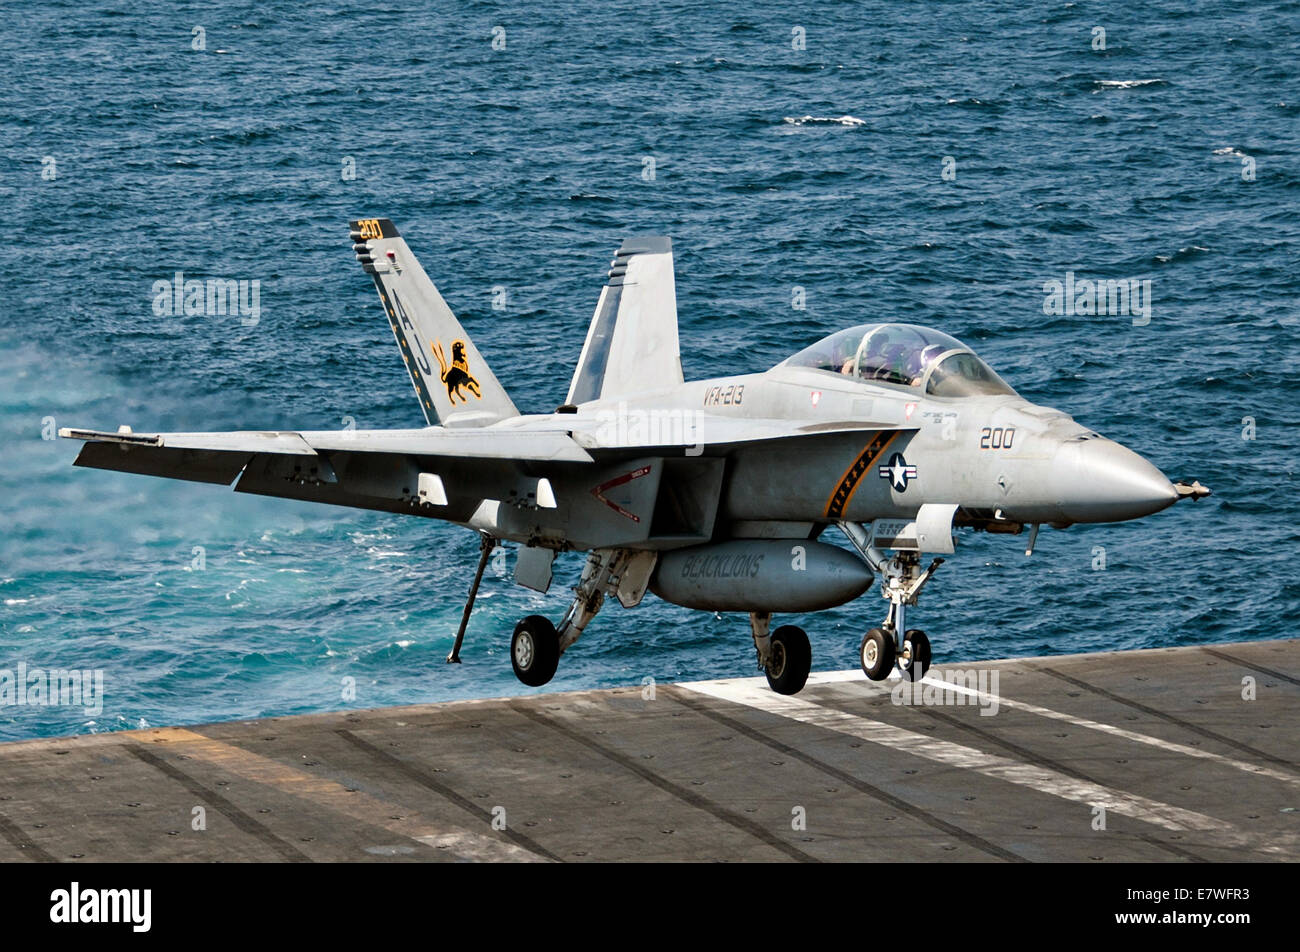 A US Navy F/A-18F Hornet fighter aircraft lands on the flight deck of the aircraft carrier USS George H.W. Bush after returning from a combat sortie against ISIS targets September 23, 2014 in the Persian Gulf. The military launched the first direct strikes on ISIS targets inside Syria. Stock Photo